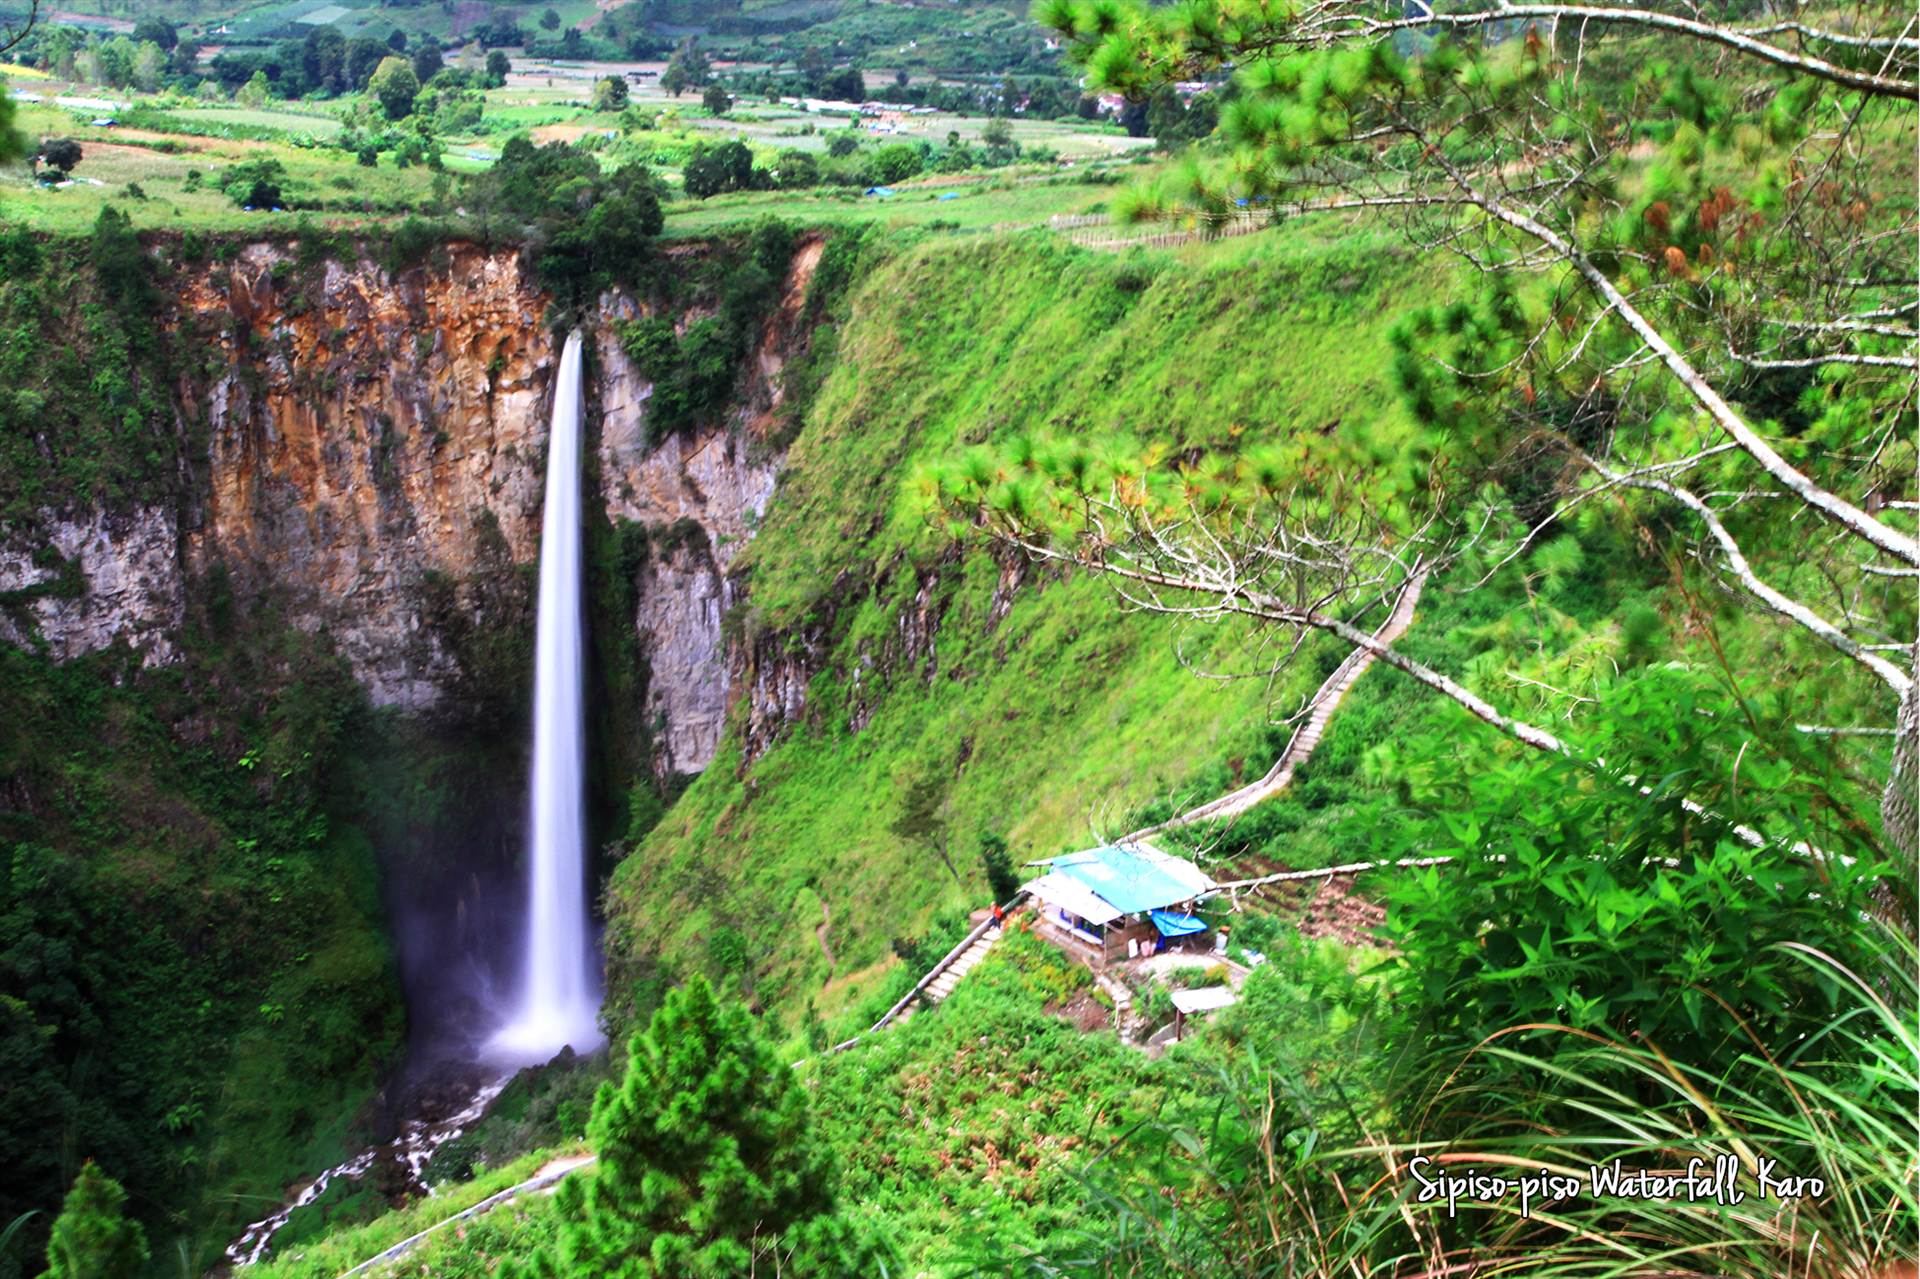 sipiso-piso waterfall.jpg  by WPC-53